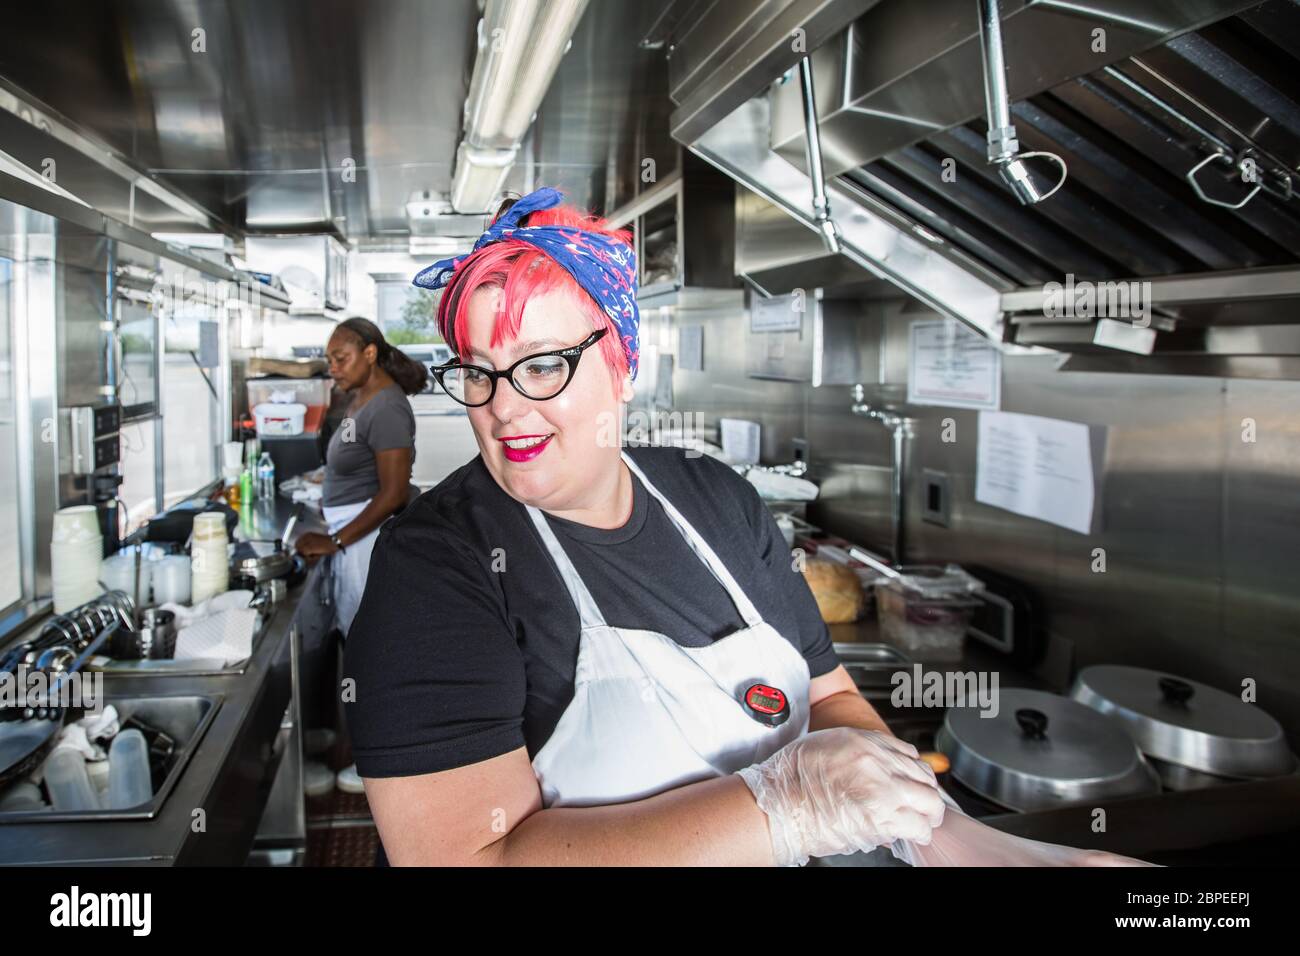 Pink haired chef puts on work gloves aboard busy food truck Stock Photo